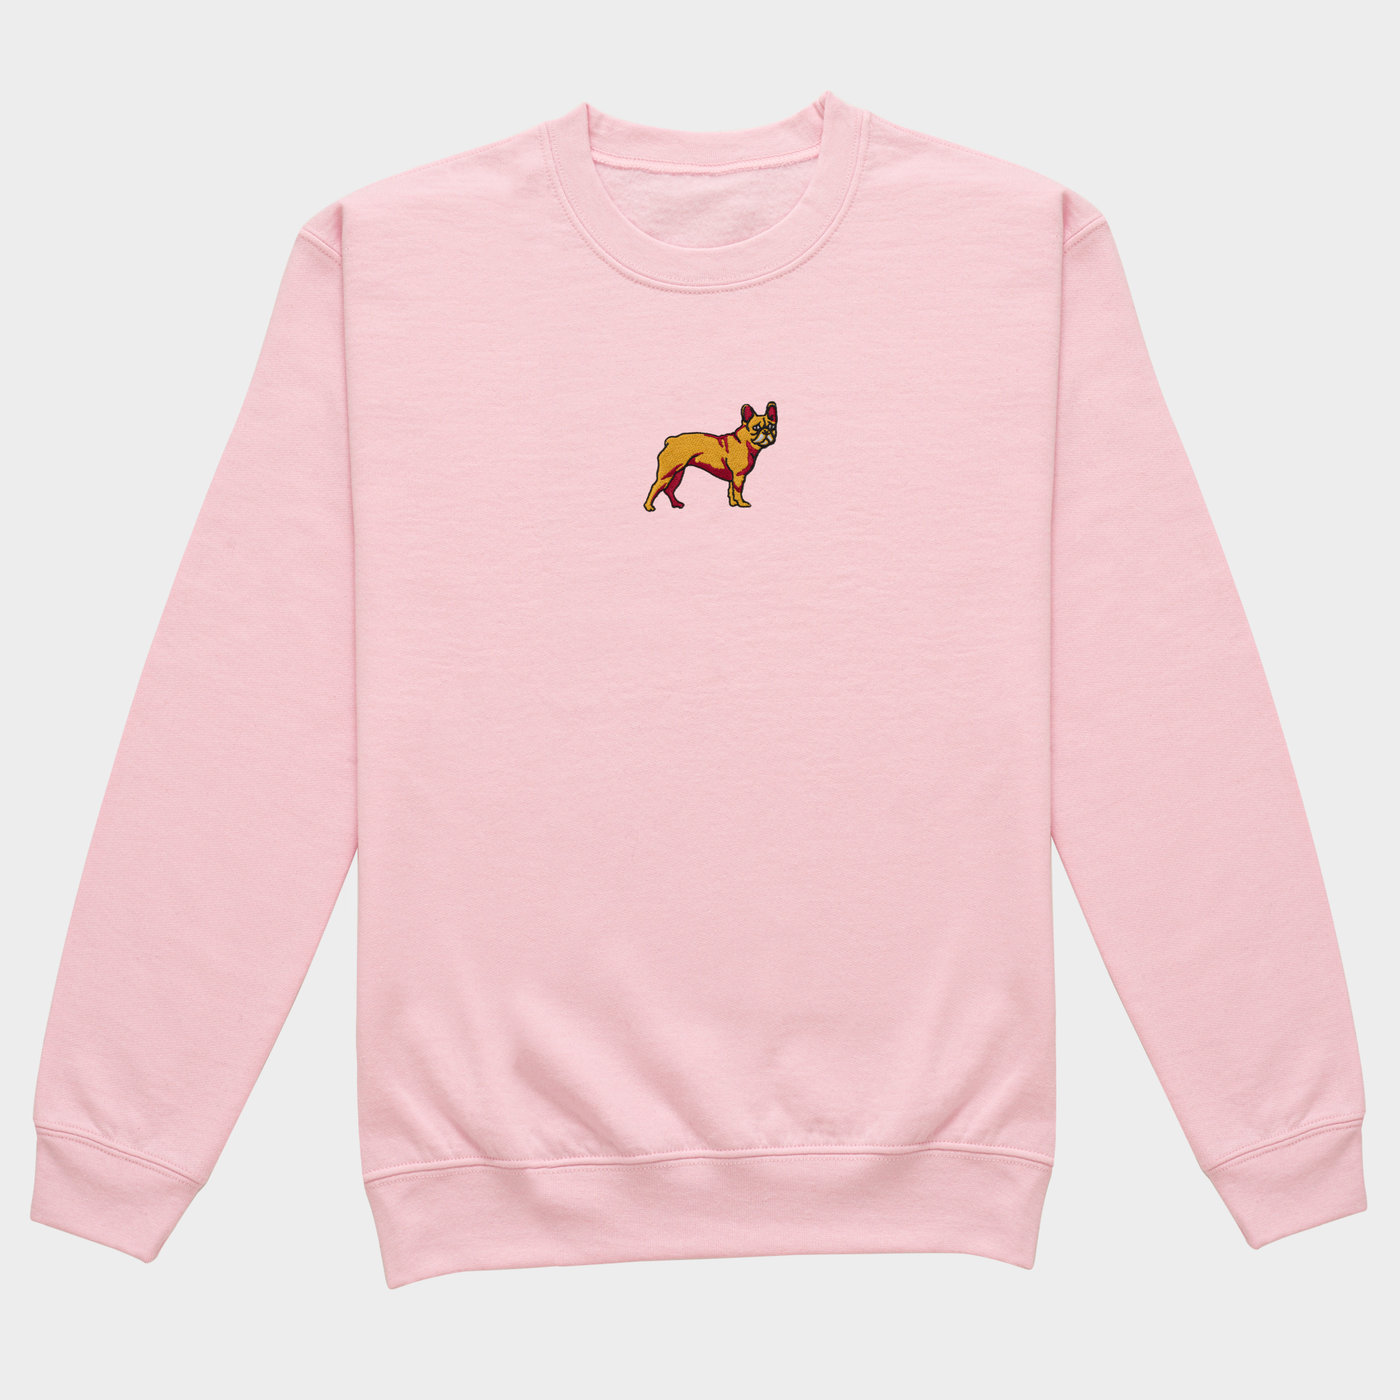 Bobby's Planet Women's Embroidered French Bulldog Sweatshirt from Paws Dog Cat Animals Collection in Light Pink Color#color_light-pink